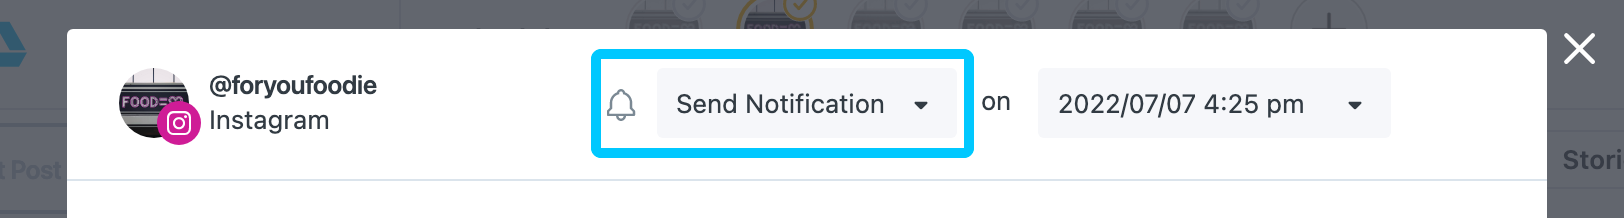 notification-publishing-post-builder.png